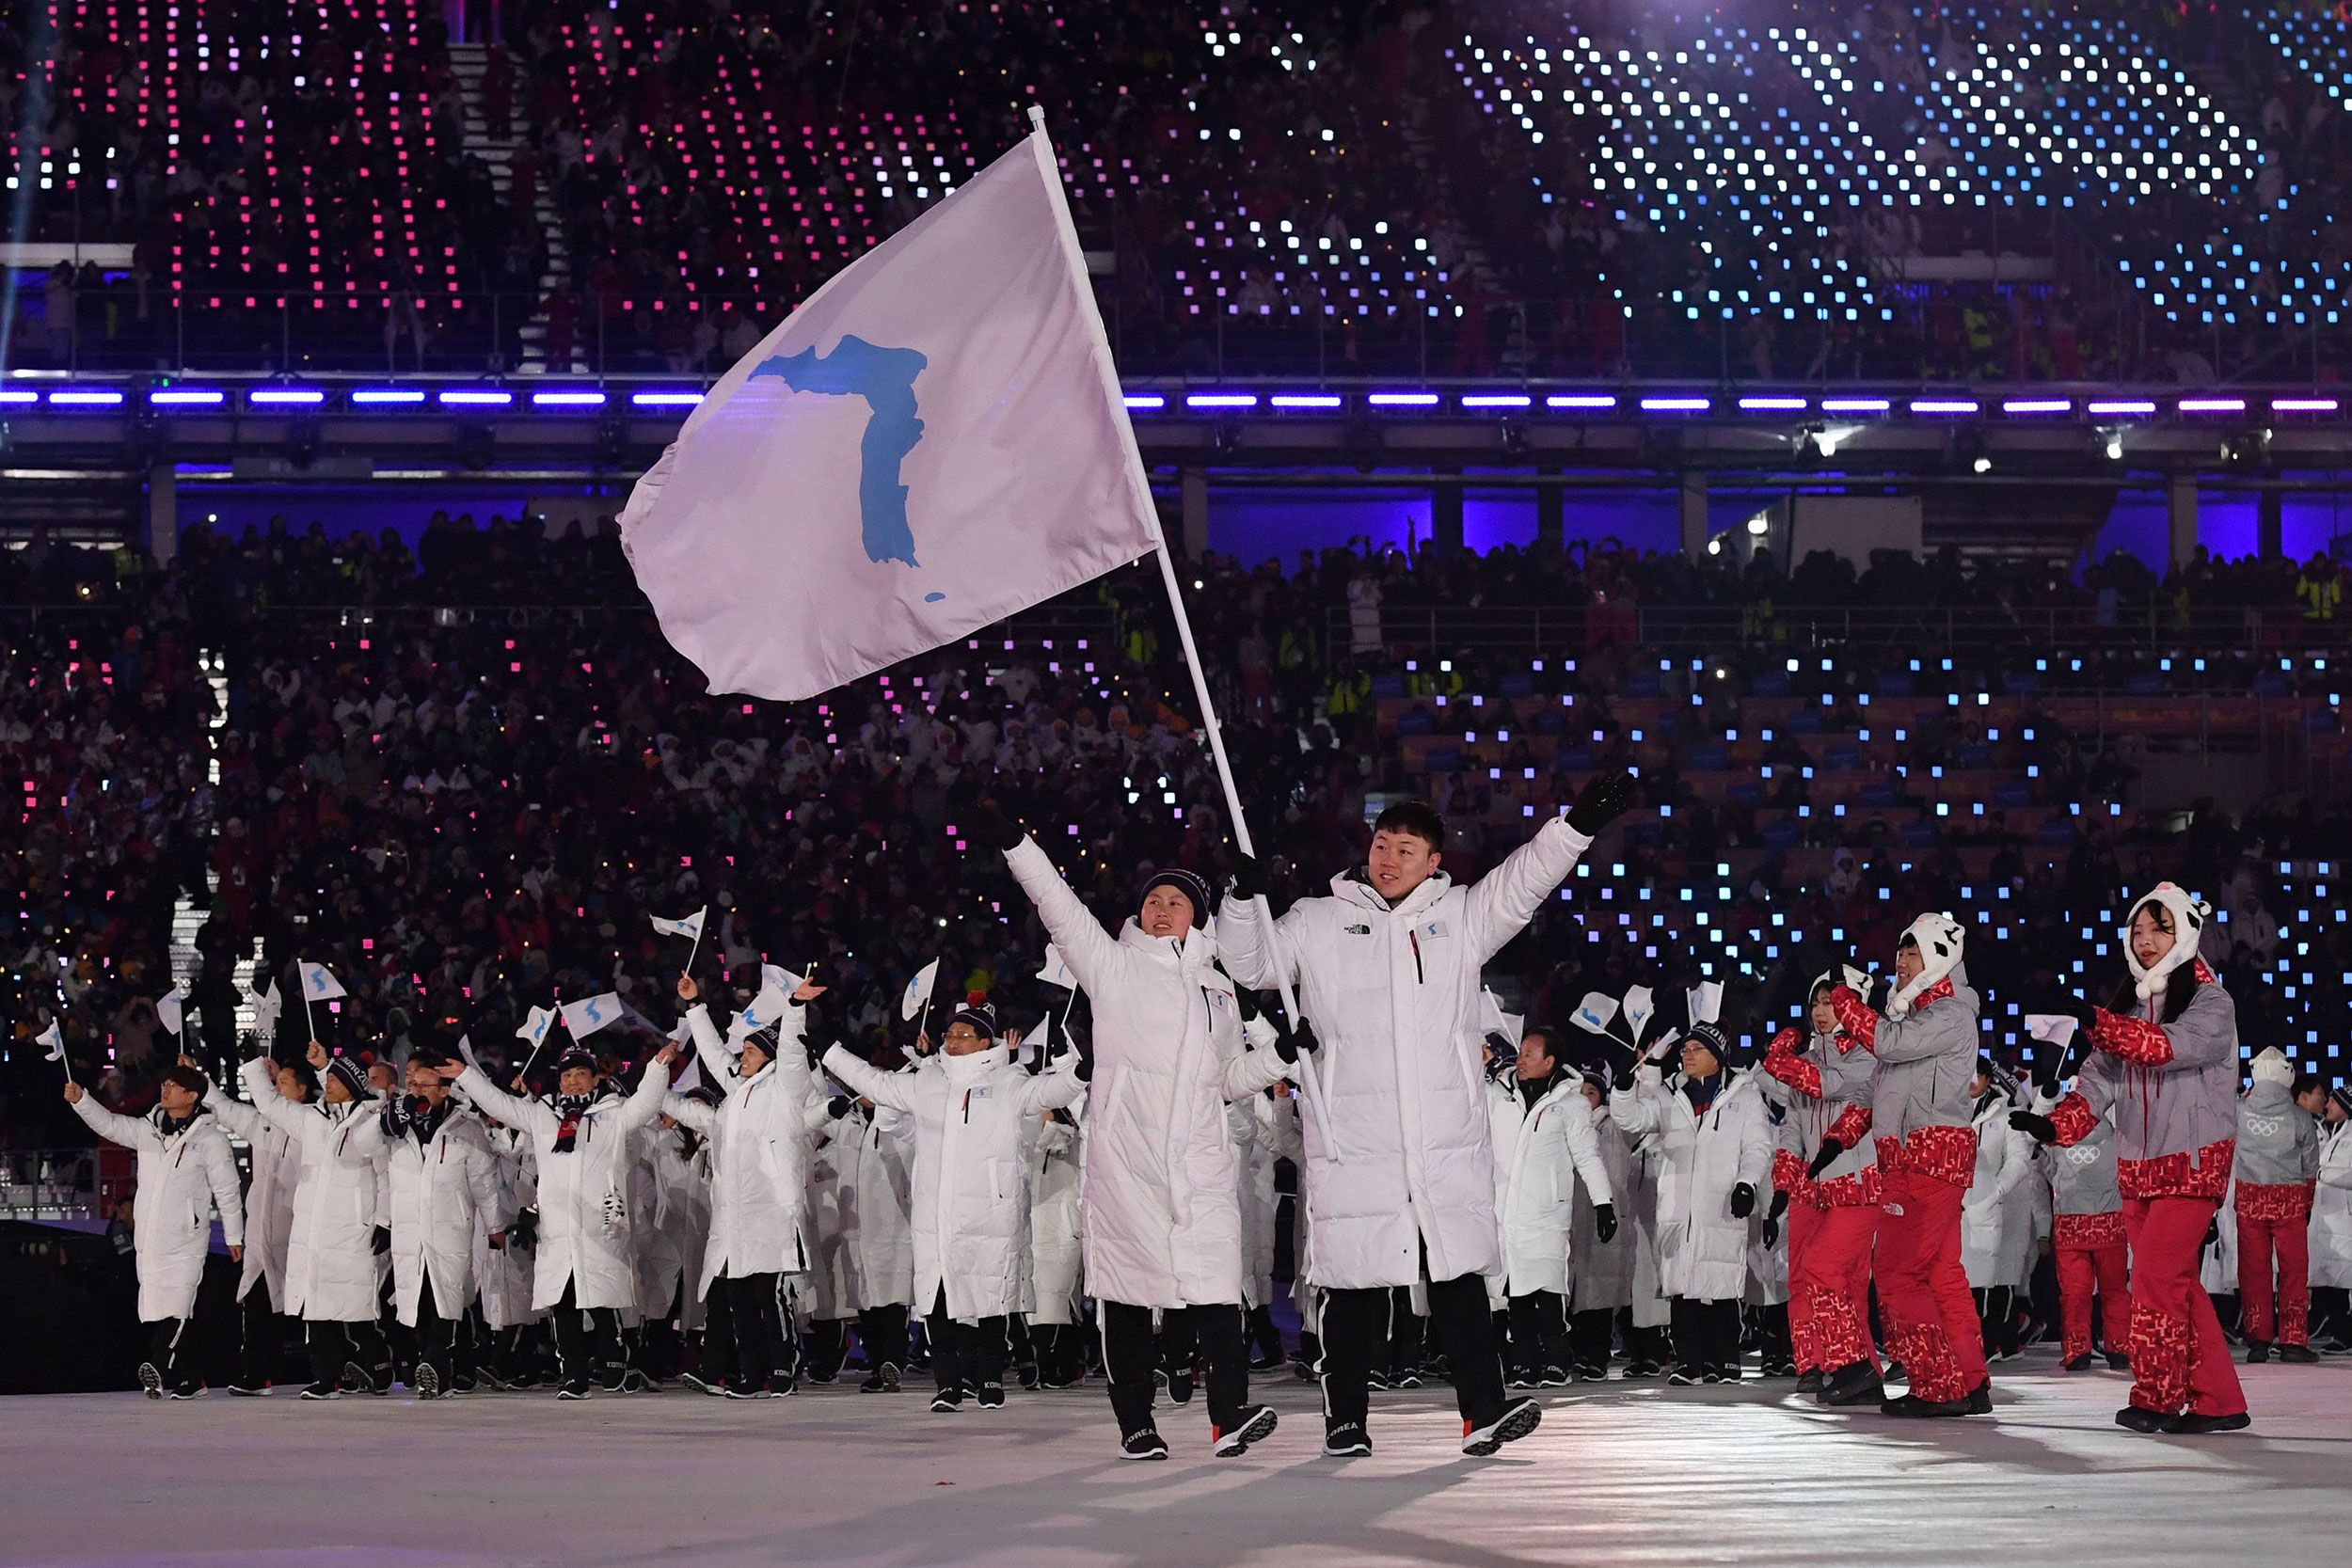 Winter Olympics 2018: 5 Buzzed-About Moments From the Opening Ceremony